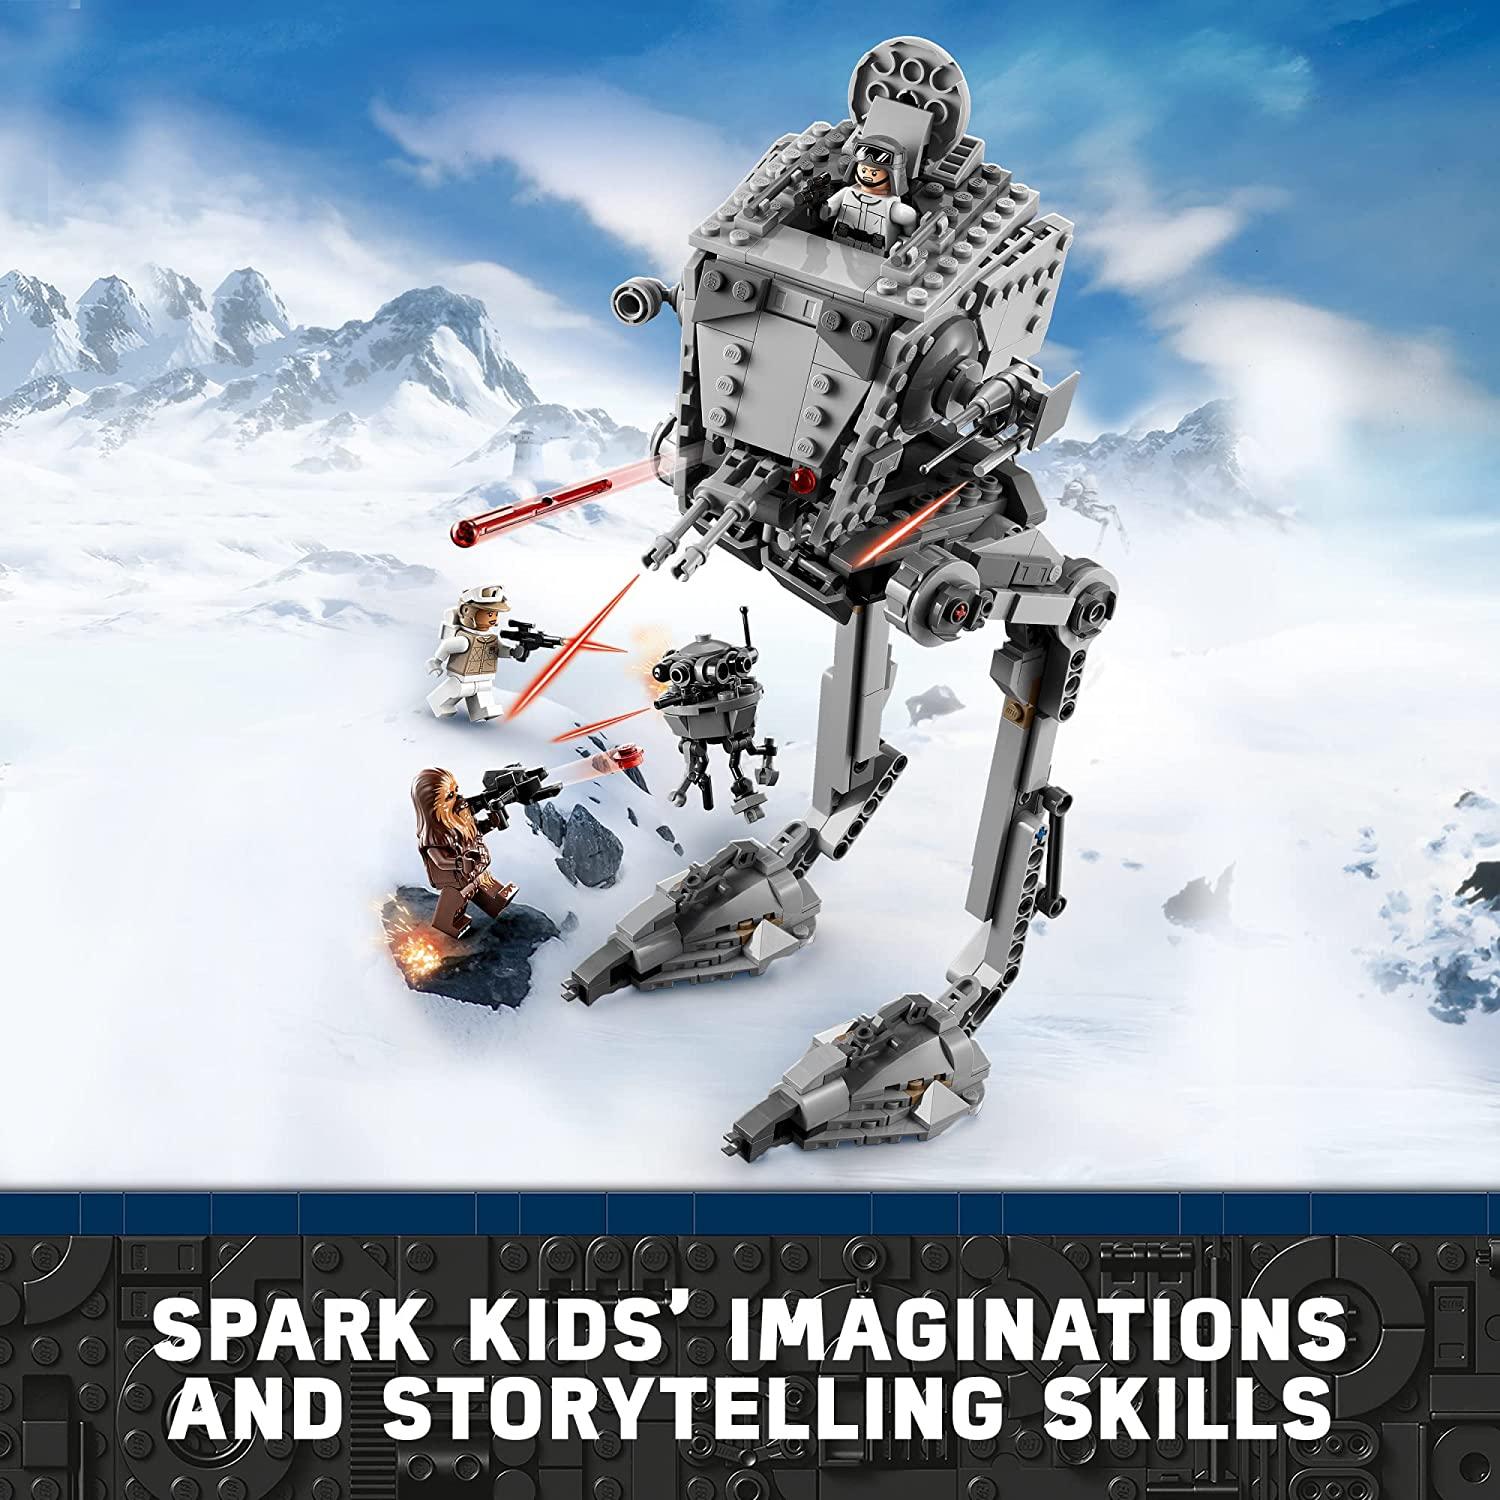 LEGO Star Wars Hoth at-ST 75322 Building Kit; with a Buildable Battle of Hoth at-ST Walker and 4 Star Wars: (586 Pieces) - BumbleToys - 8+ Years, 8-13 Years, Boys, LEGO, OXE, Pre-Order, star wars